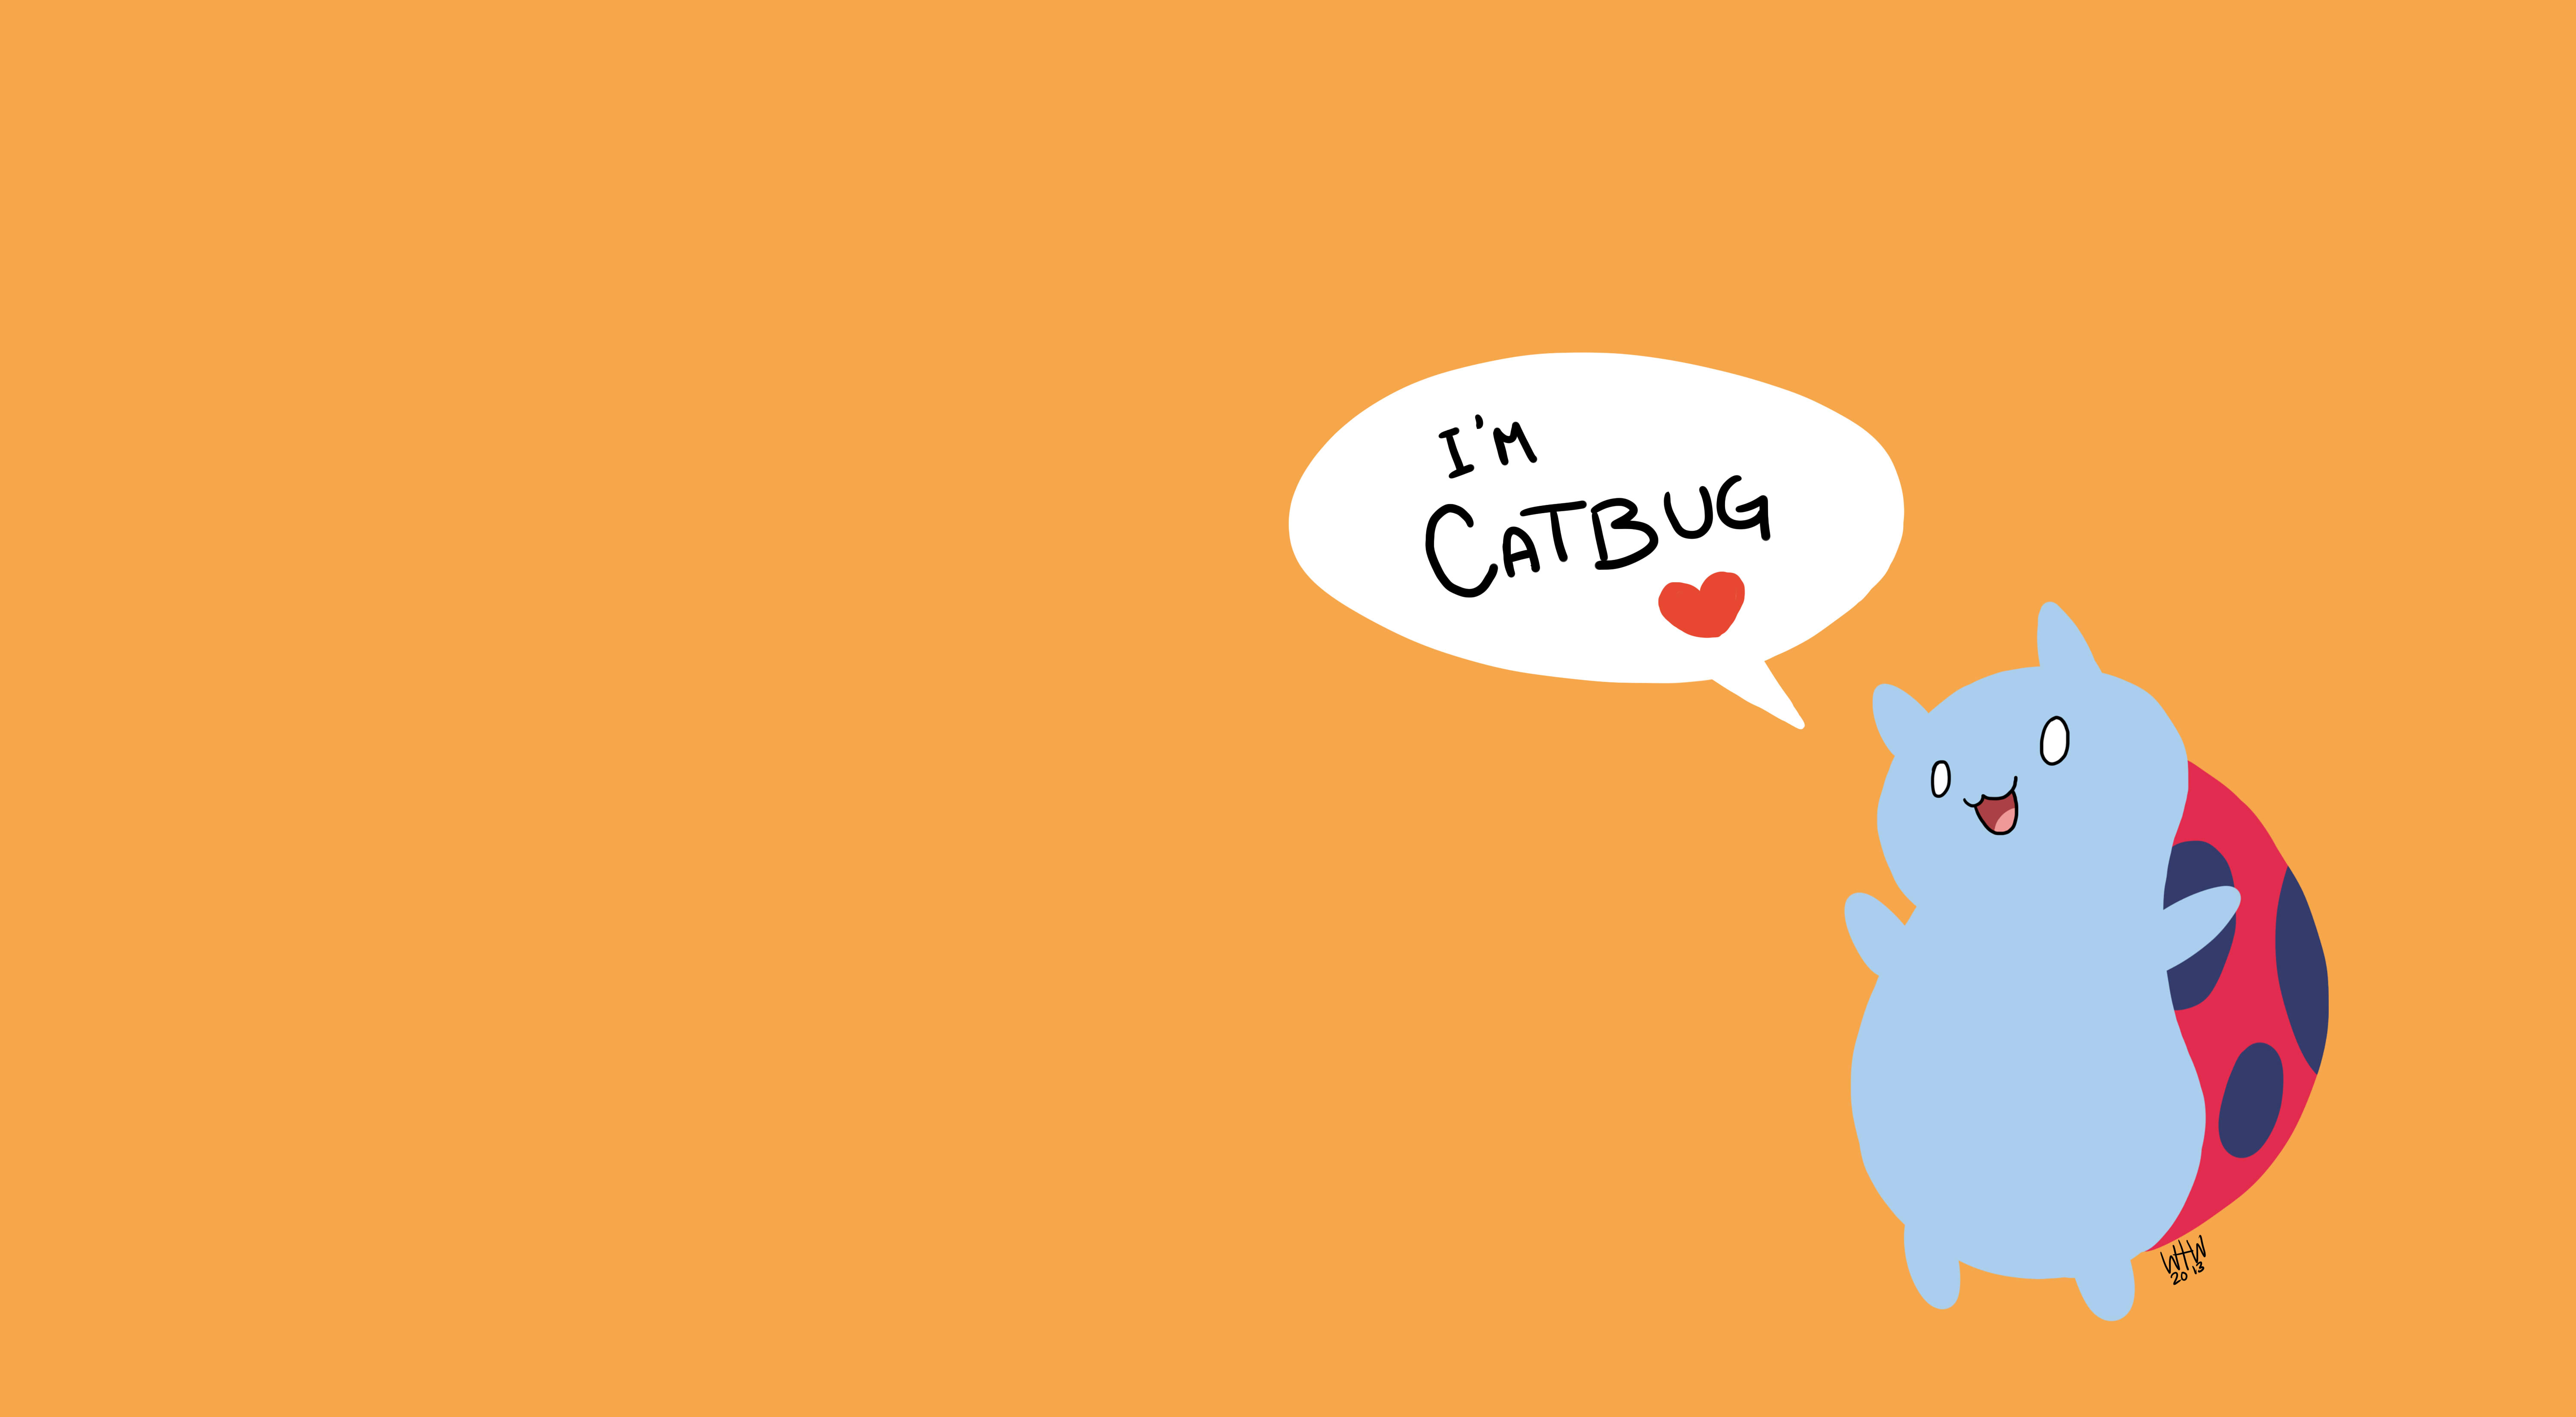 Catbug by water-wing